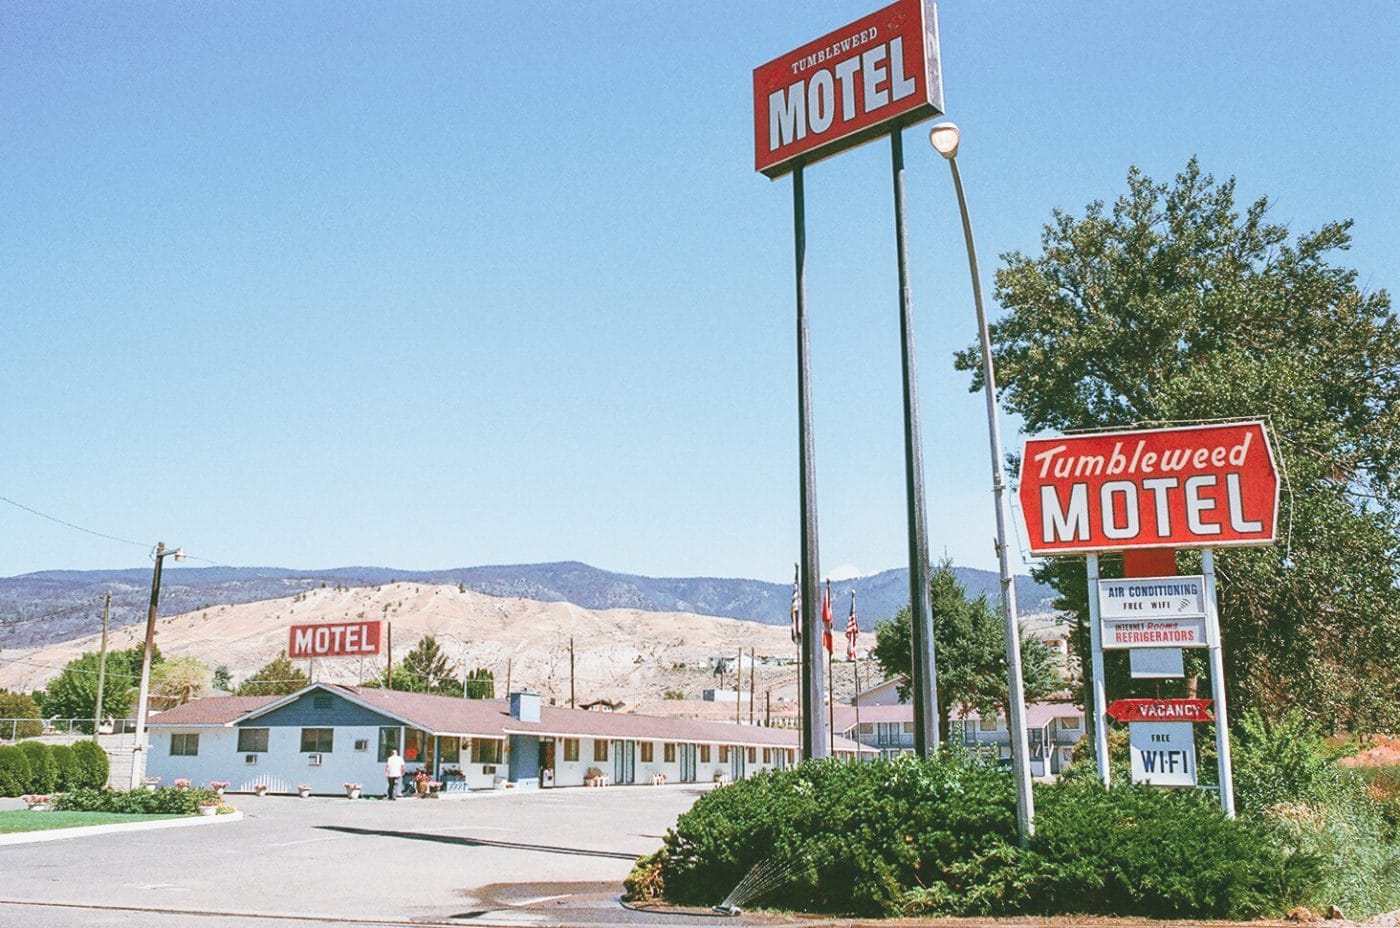 analog photo series on motels in Canada by Sacha Jennis